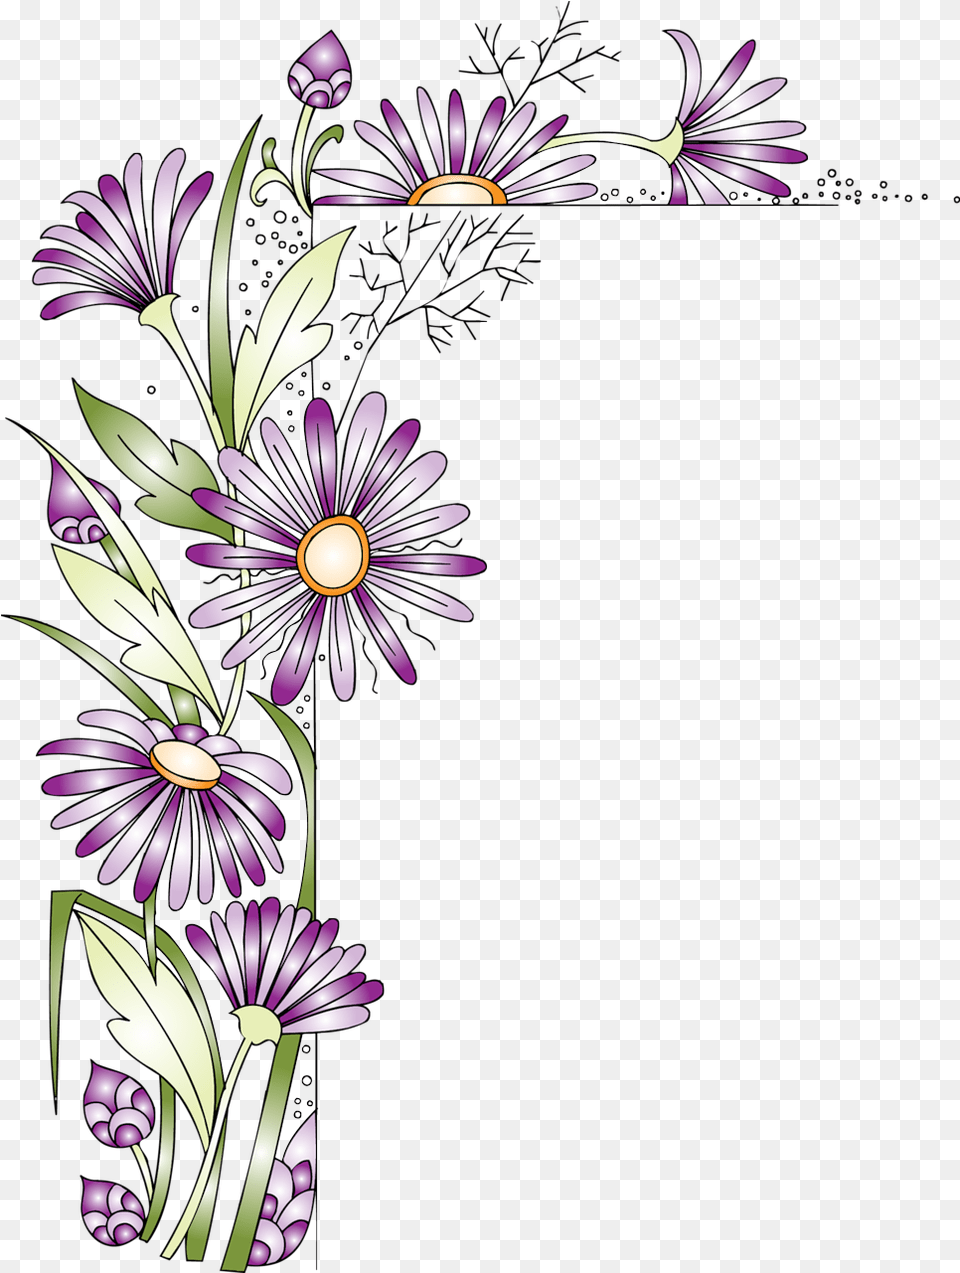 Purple Flower Border African Daisy Image With Transparent Purple Flower Border, Art, Floral Design, Graphics, Pattern Png